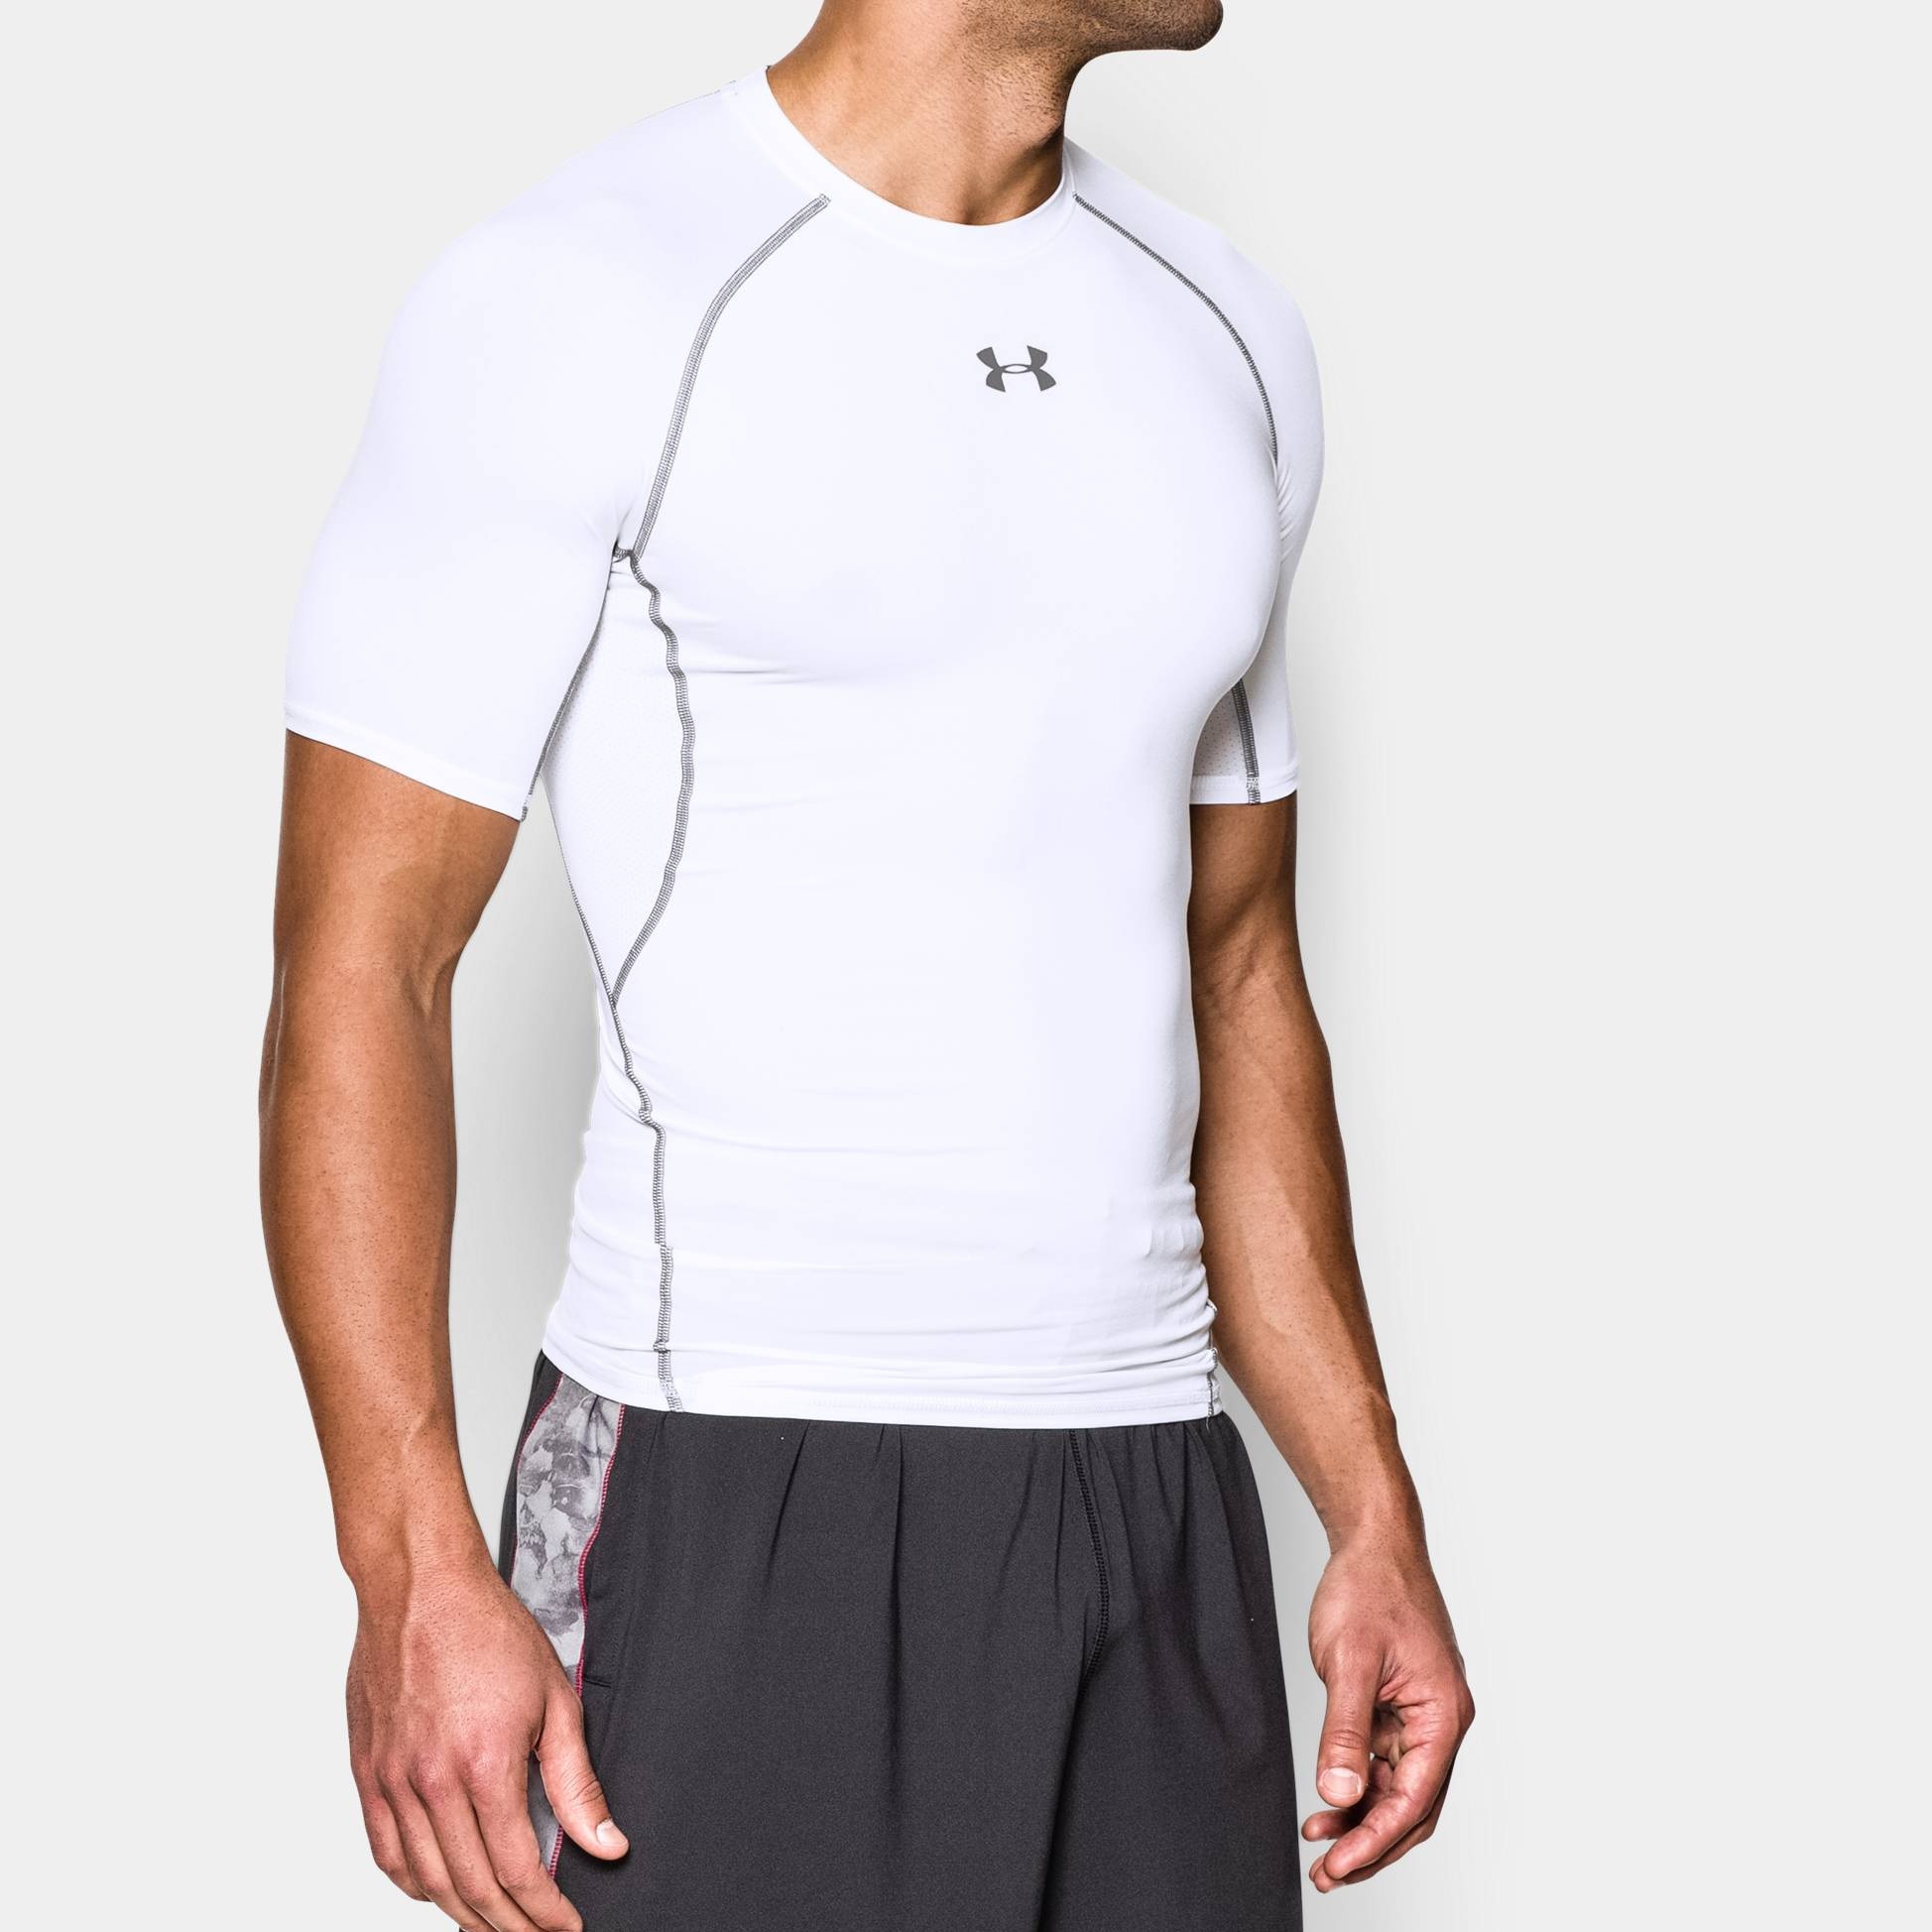 Under armour Short Sleeve Compr. Shirt | Clothing